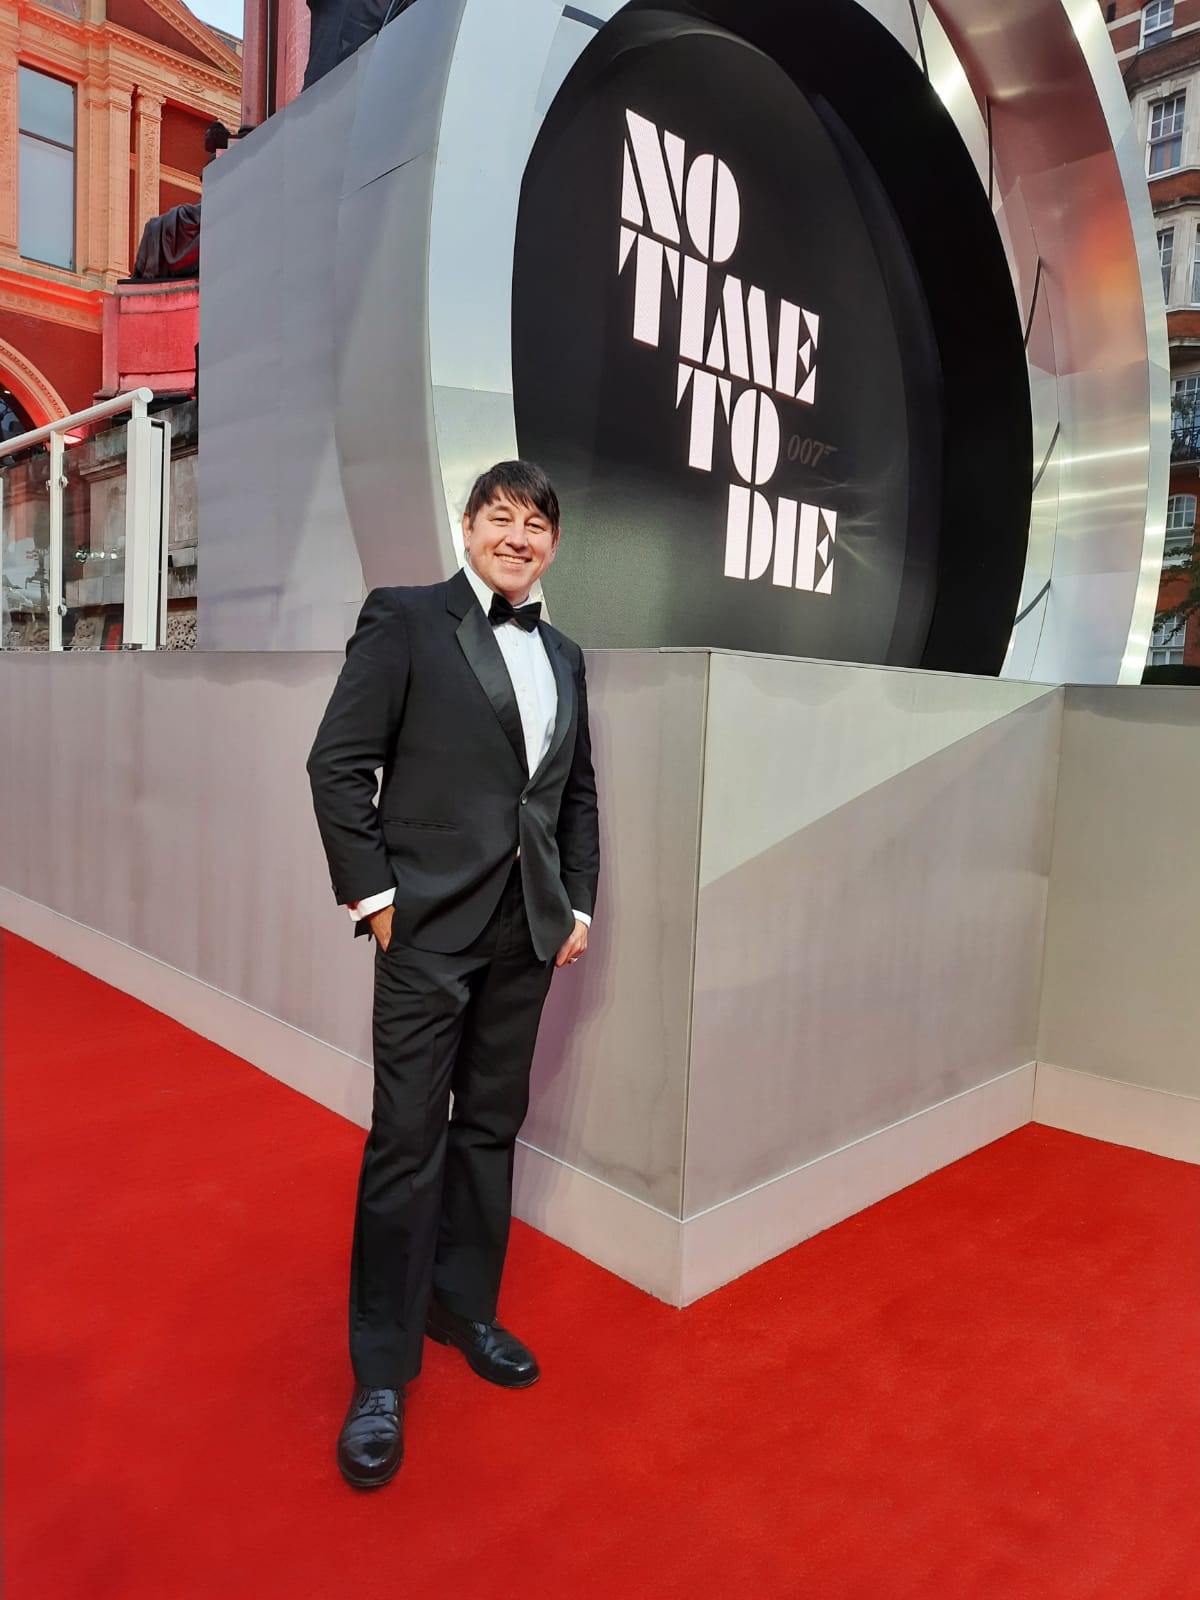 Chris Distin at the World Premiere of NO TIME TO DIE